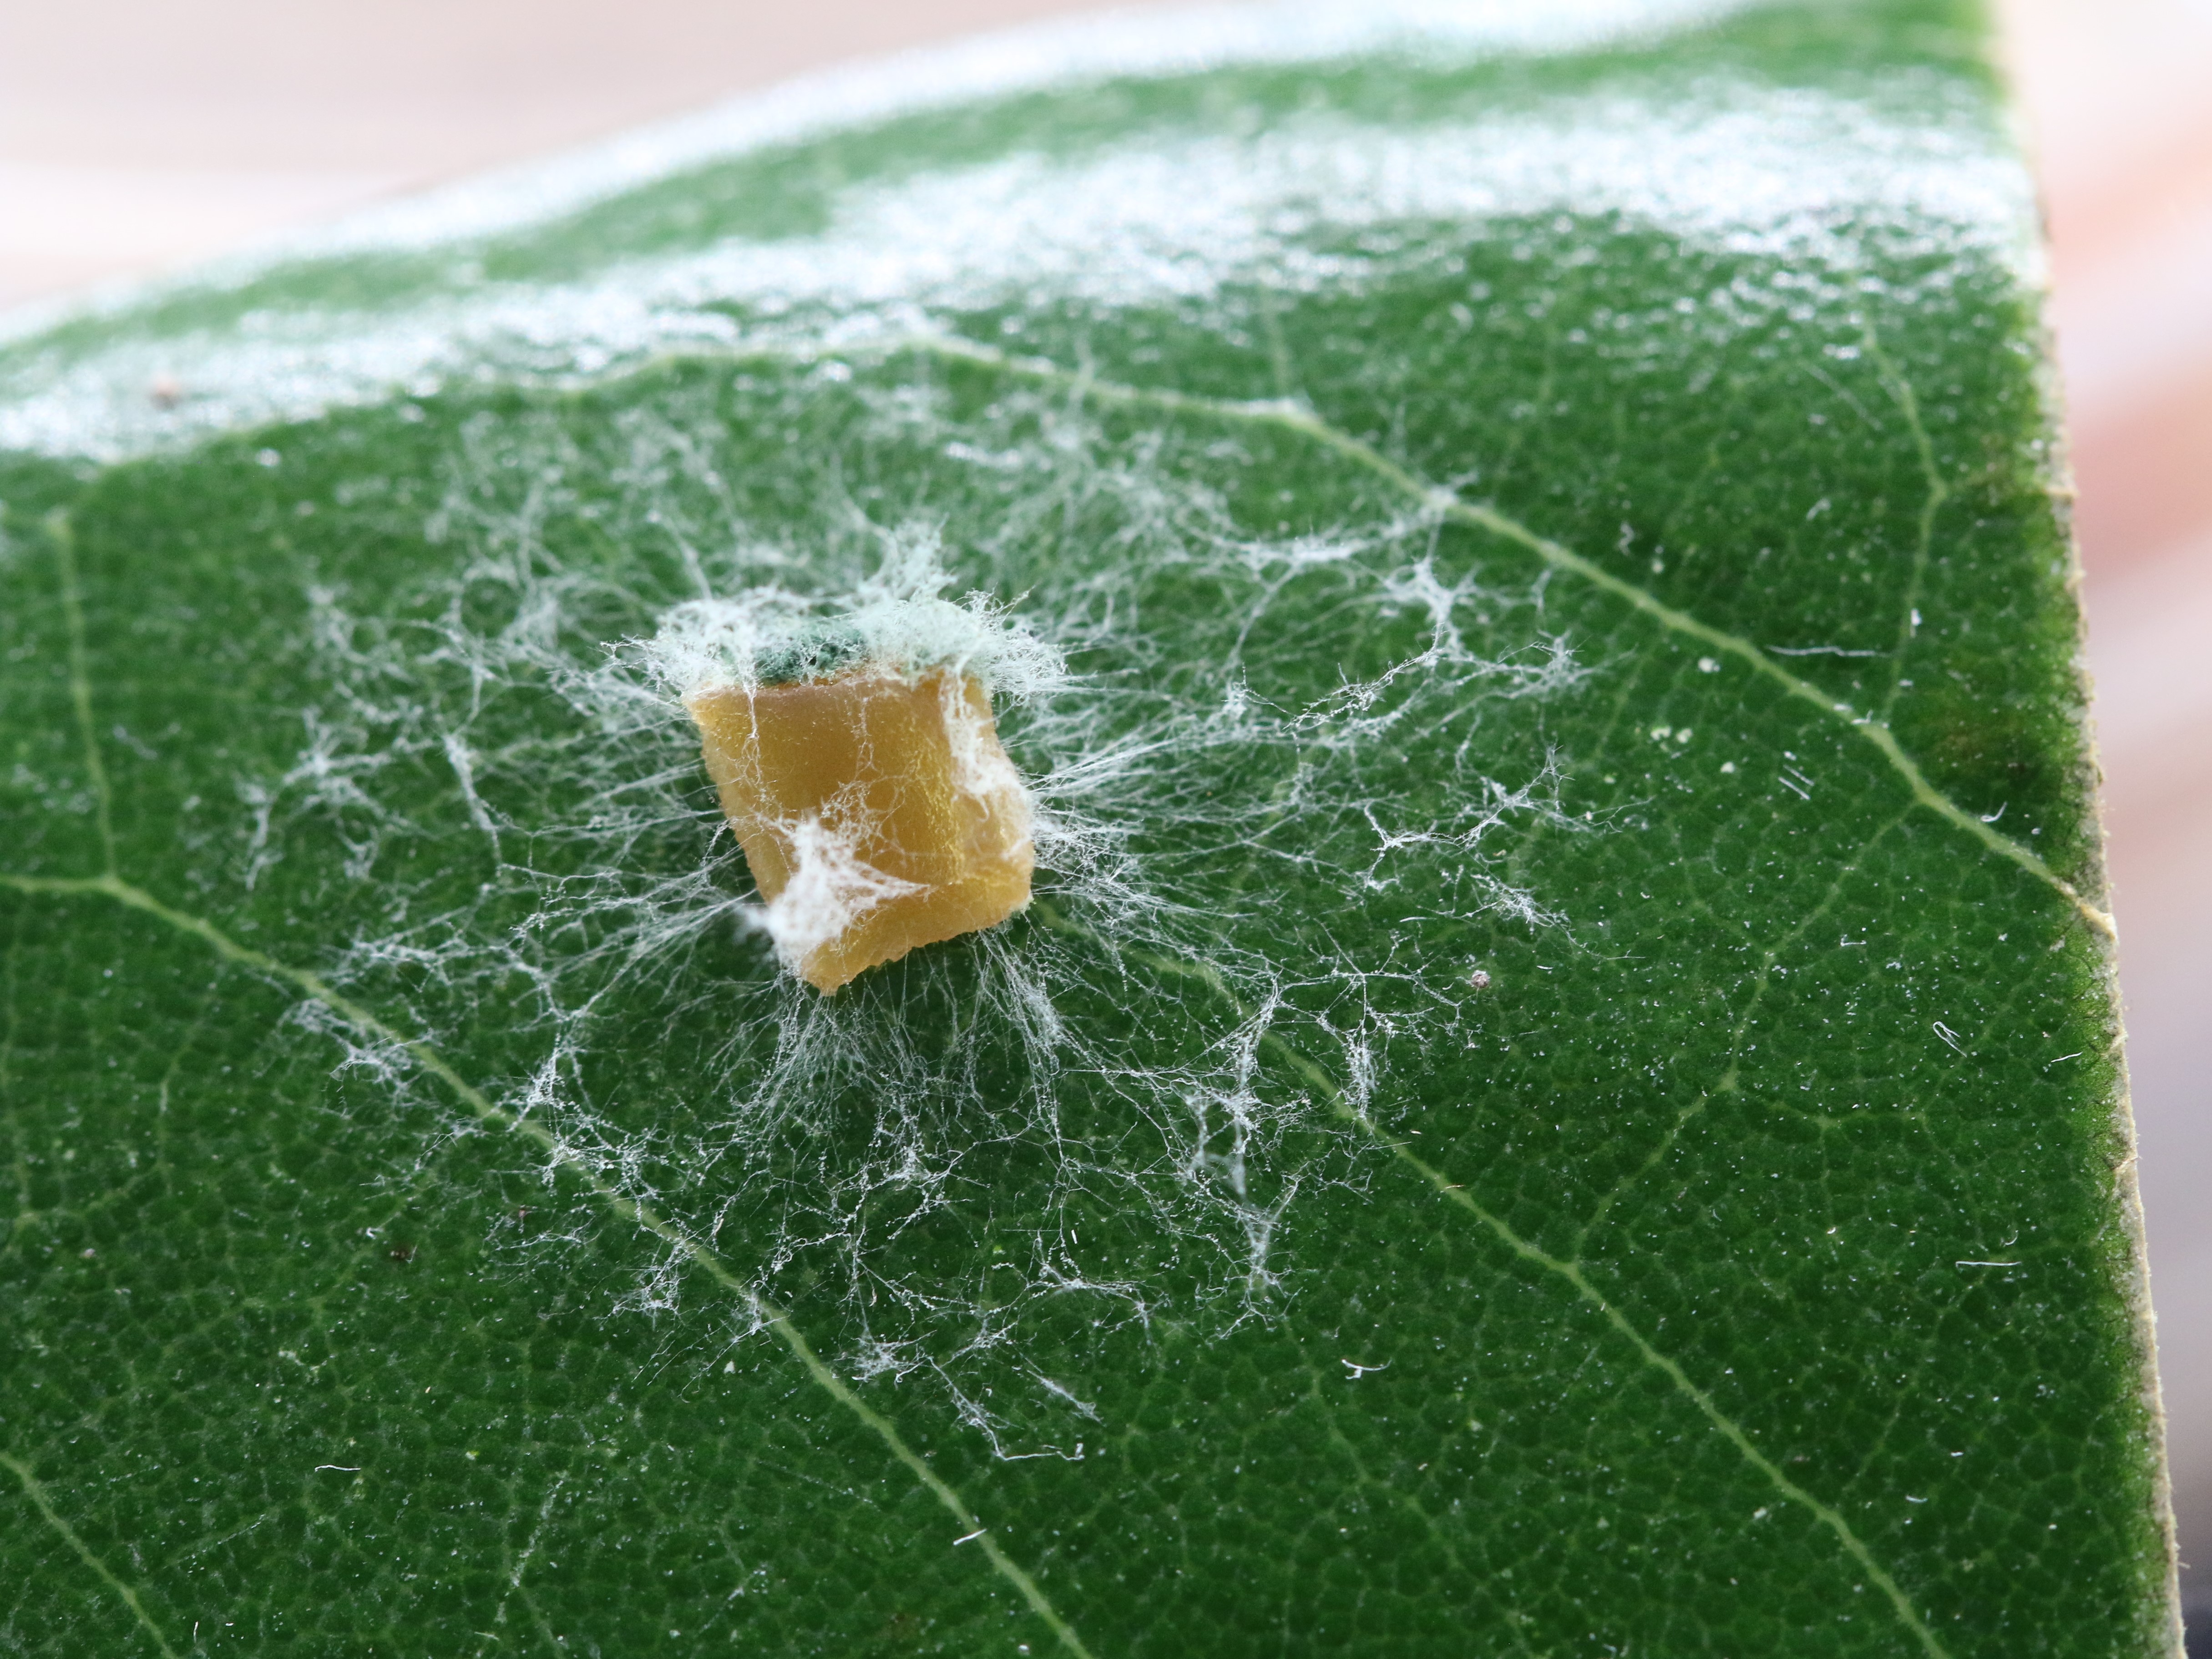 A fungus growing on a leaf appears at a lattice of filaments connected to a central square structure